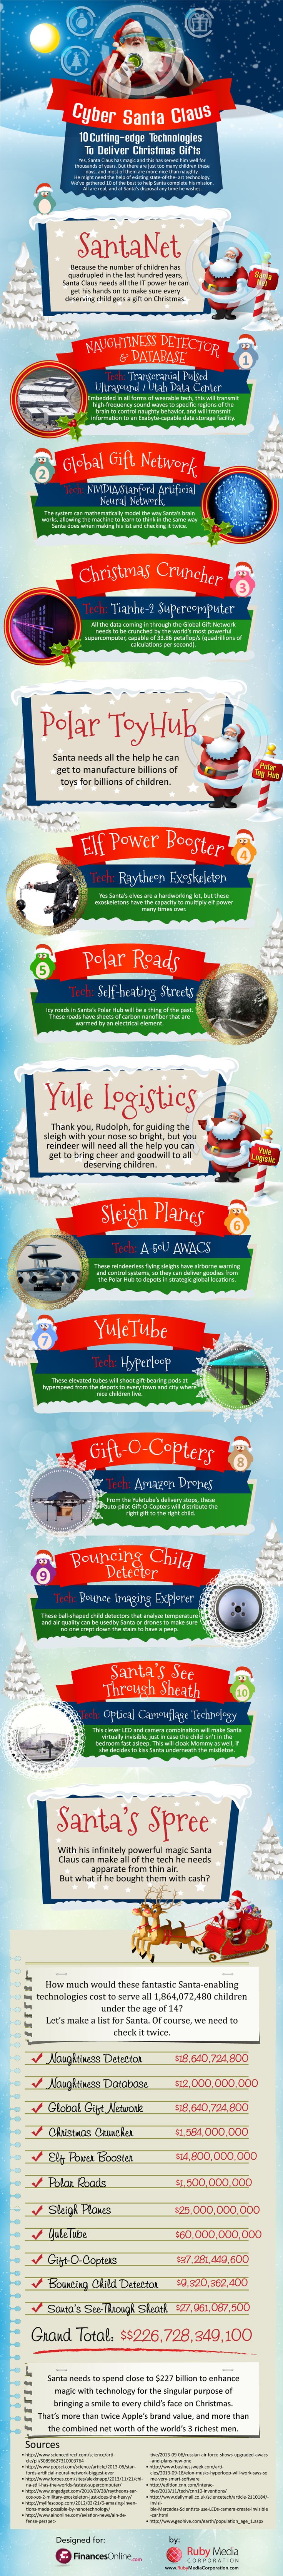 Cyber Santa Claus: 10 Cutting-edge Technologies To Deliver Your Christmas Gifts